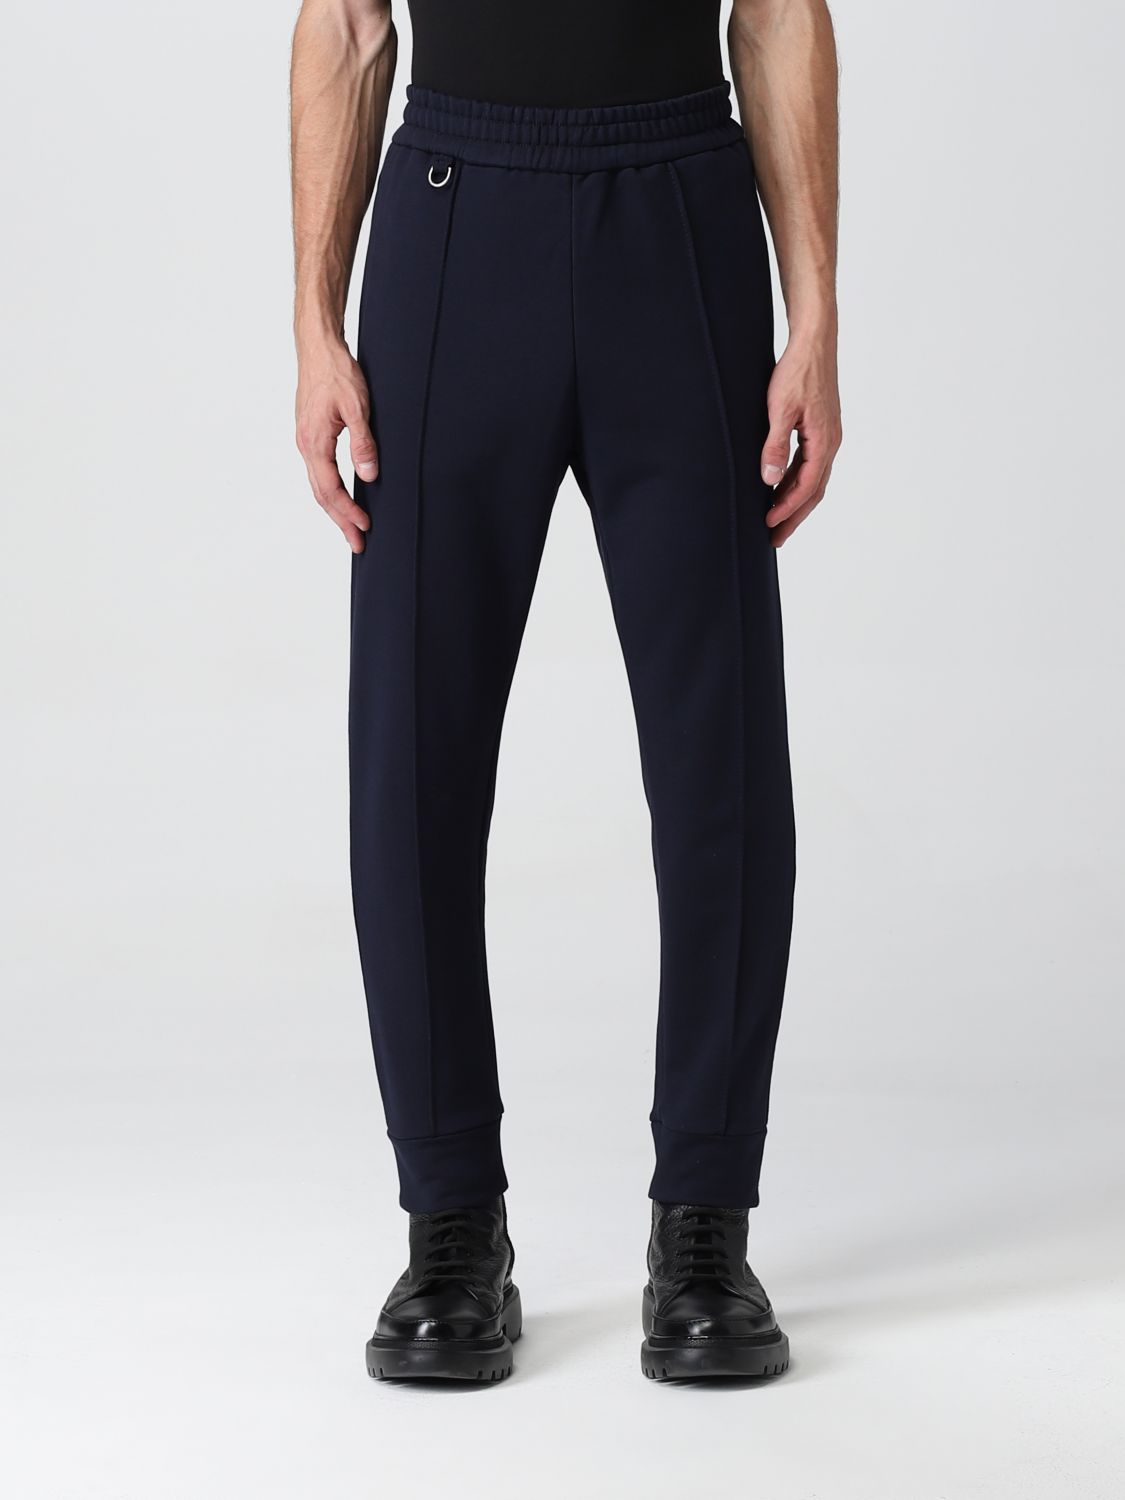 Trousers Paolo Pecora: Paolo Pecora trousers for men blue 1